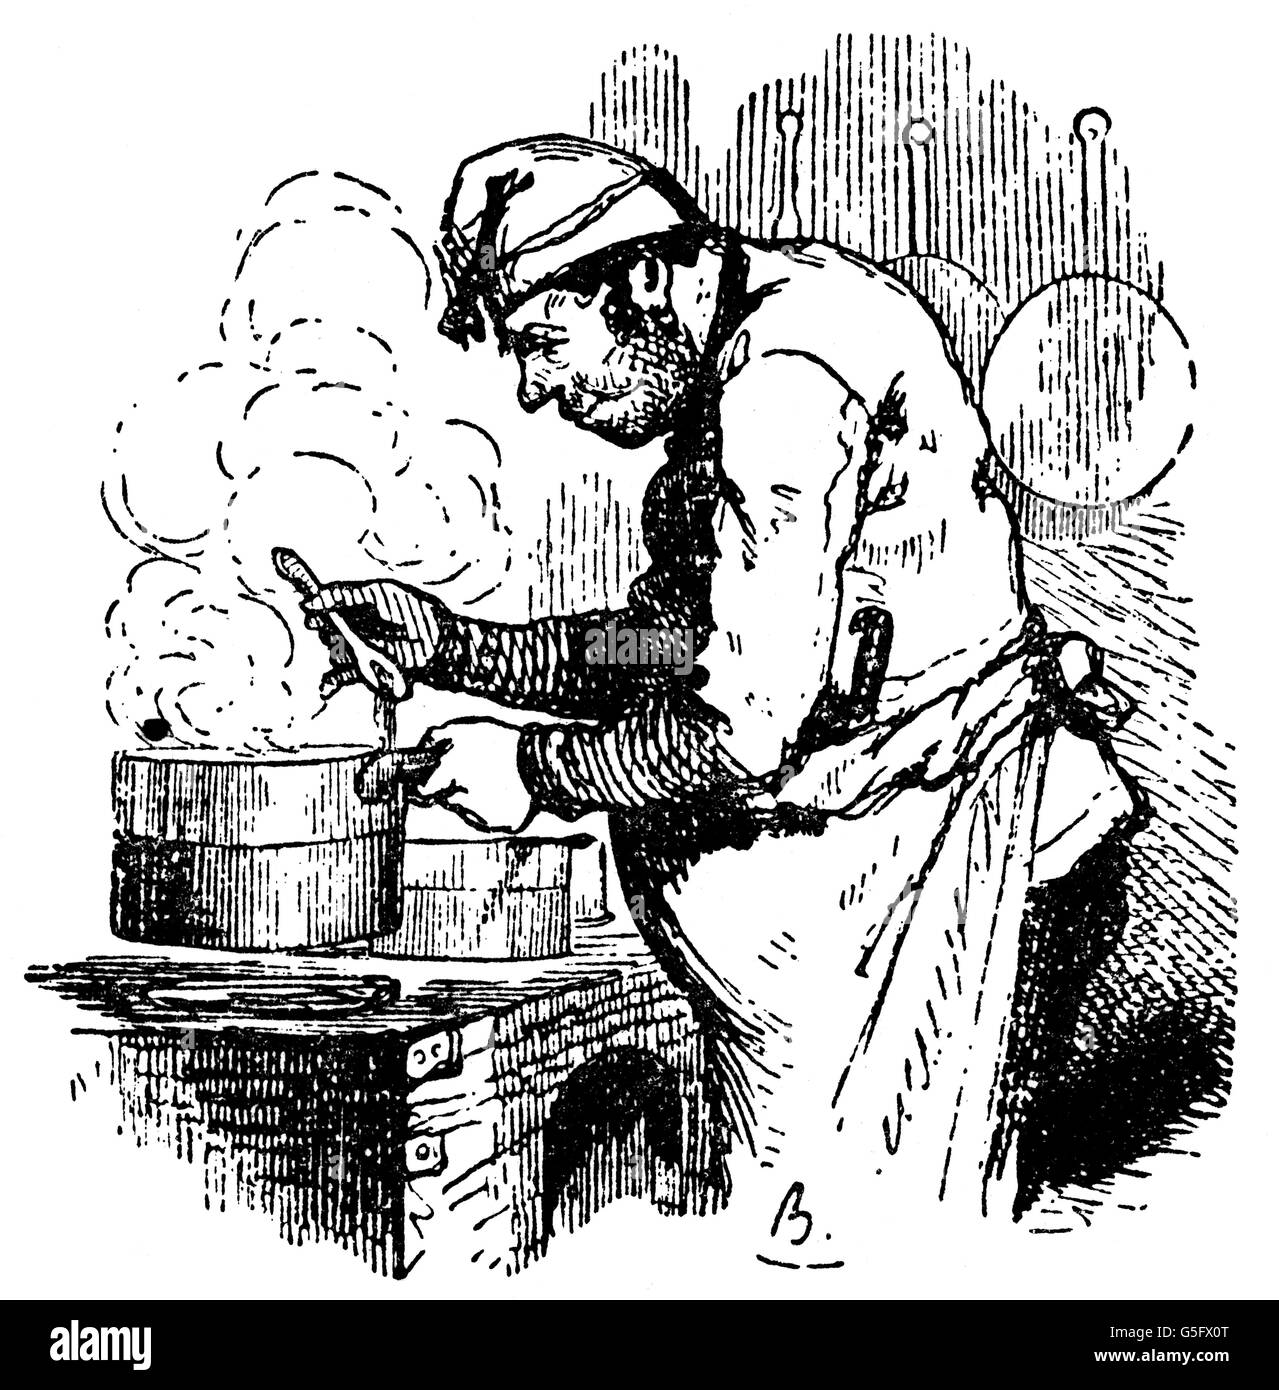 gastronomy, cooks, chef at stove, by Bertall, (1820 - 1882), drawing, 19th century, 19th century, graphic, graphics, caricature, caricatures, satire, half length, profile, side-face, profiles, profession, professions, cap, caps, apron, aprons, standing, spoon, spoons, pot, pots, stove, stoves, cooking, boil, boiling, boiled, cook, cooks, chef, chefs, historic, historical, male, man, people, men, Additional-Rights-Clearences-Not Available Stock Photo